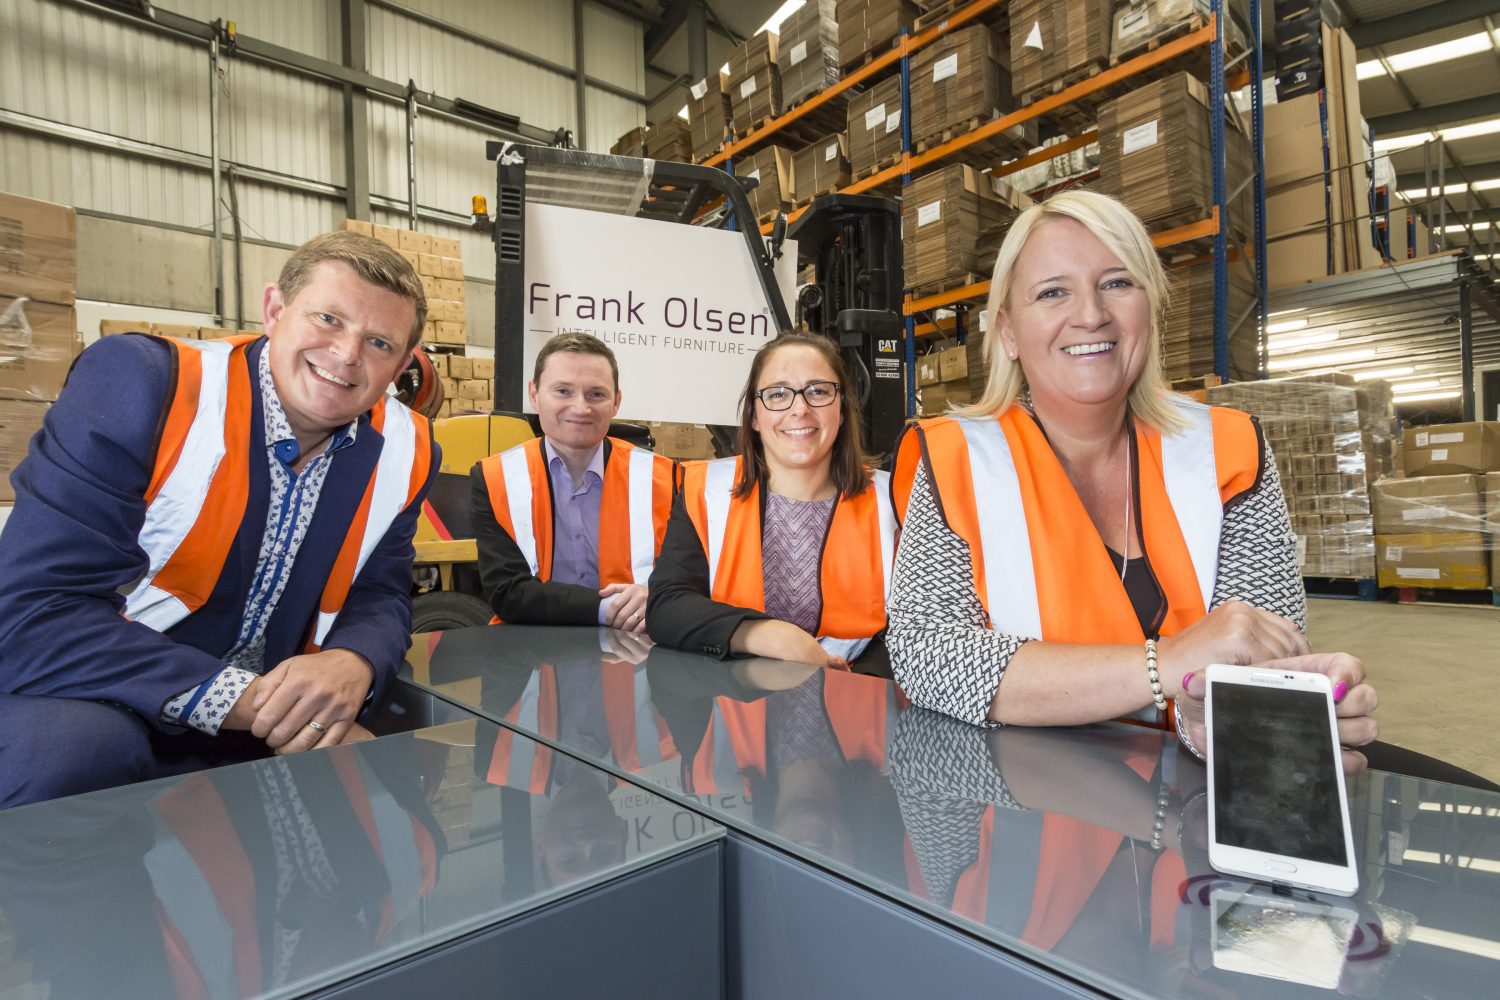 Four women standing in a factory with Frank Olsen signage behind them. They are all wearing high vis jackets. There are two women in the group and the woman to the far right has blonde hair and standing next to her is a woman with dark hair wearing glasses.